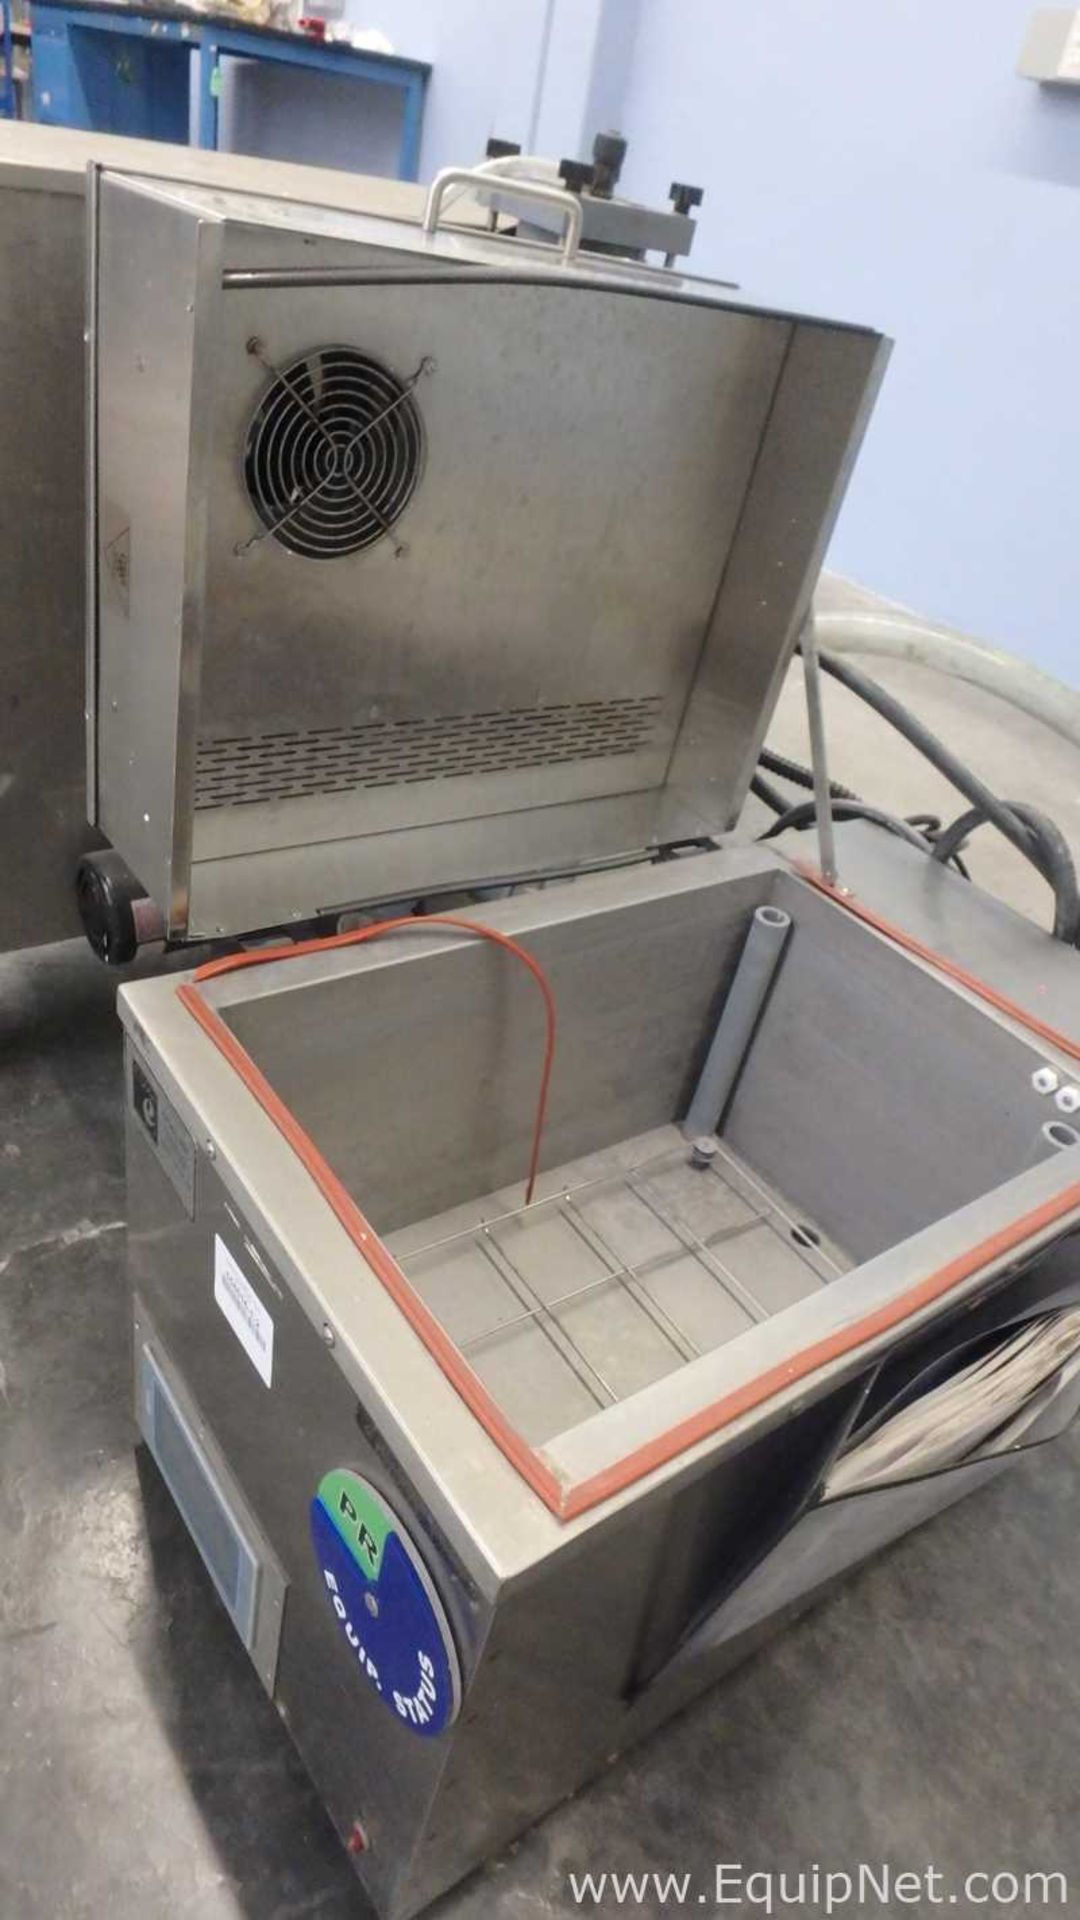 ESMA Inc. E700 Ultrasonic Cleaning System with E997 30Gal Heated Storage Tank - Image 21 of 38